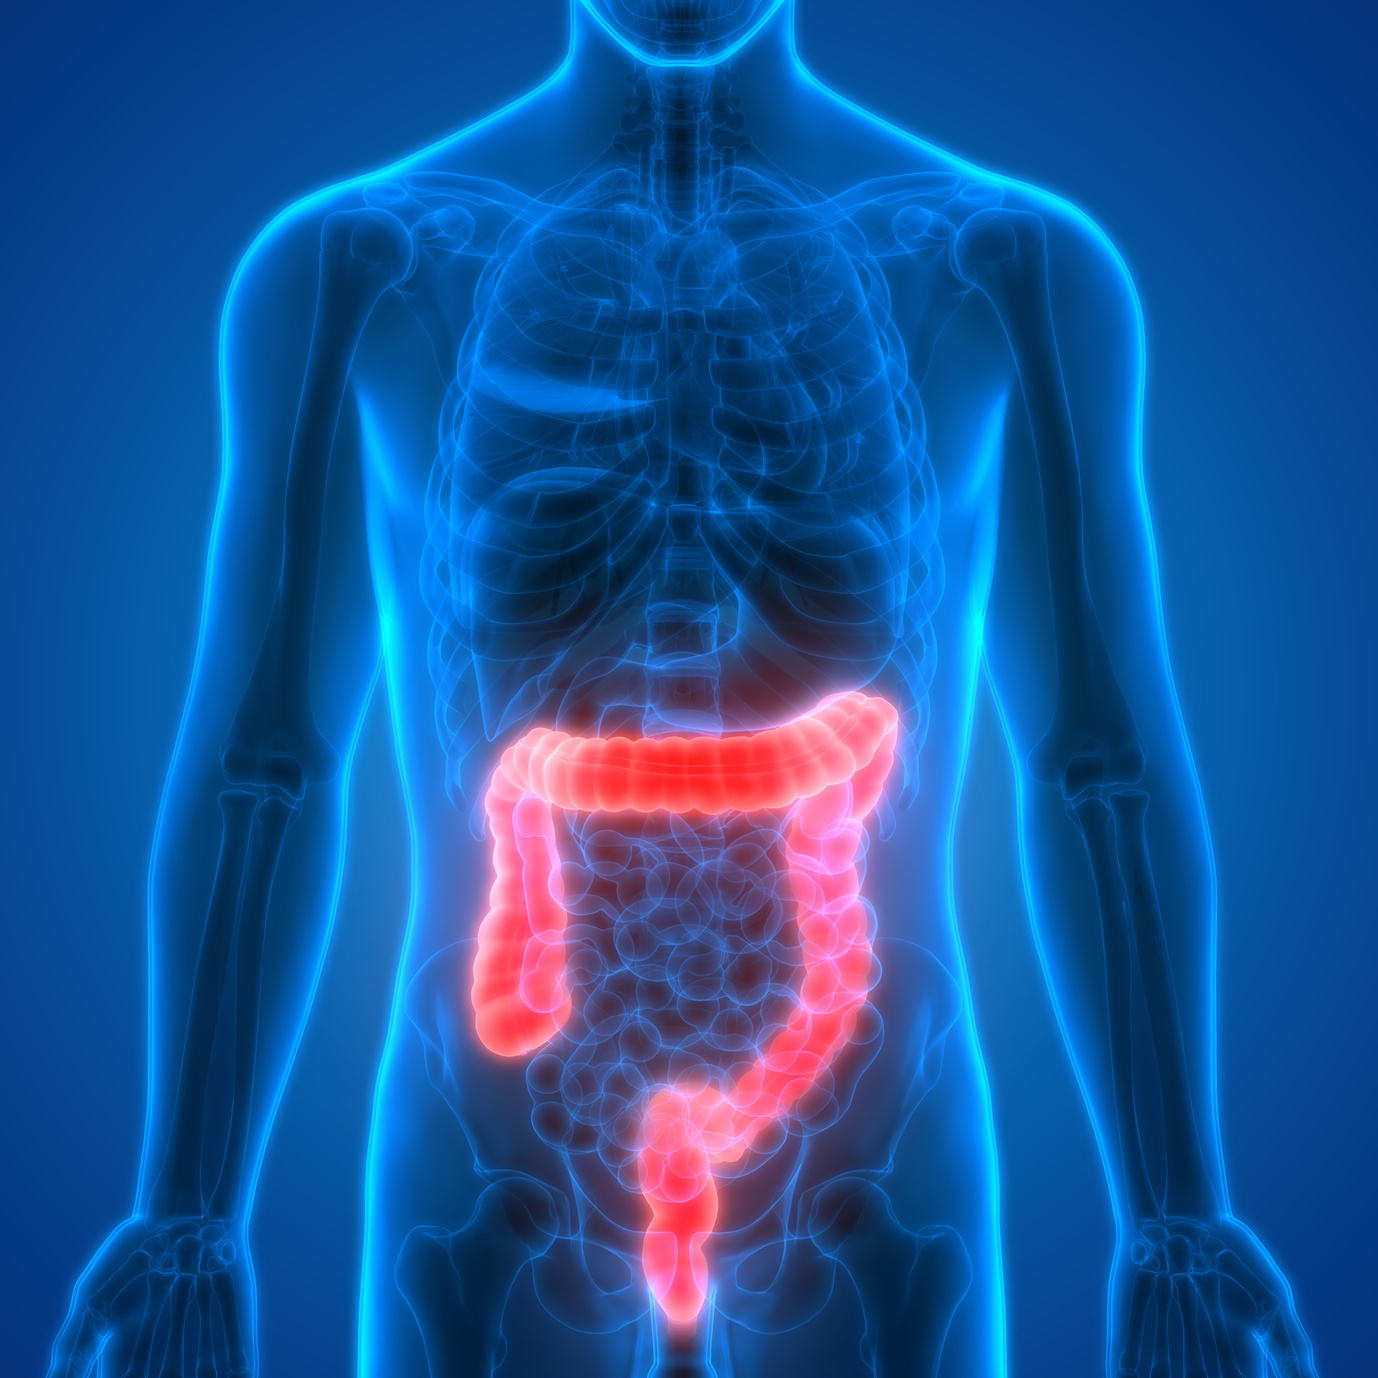 maintrac® for colorectal cancer (carcinoma of the colon)